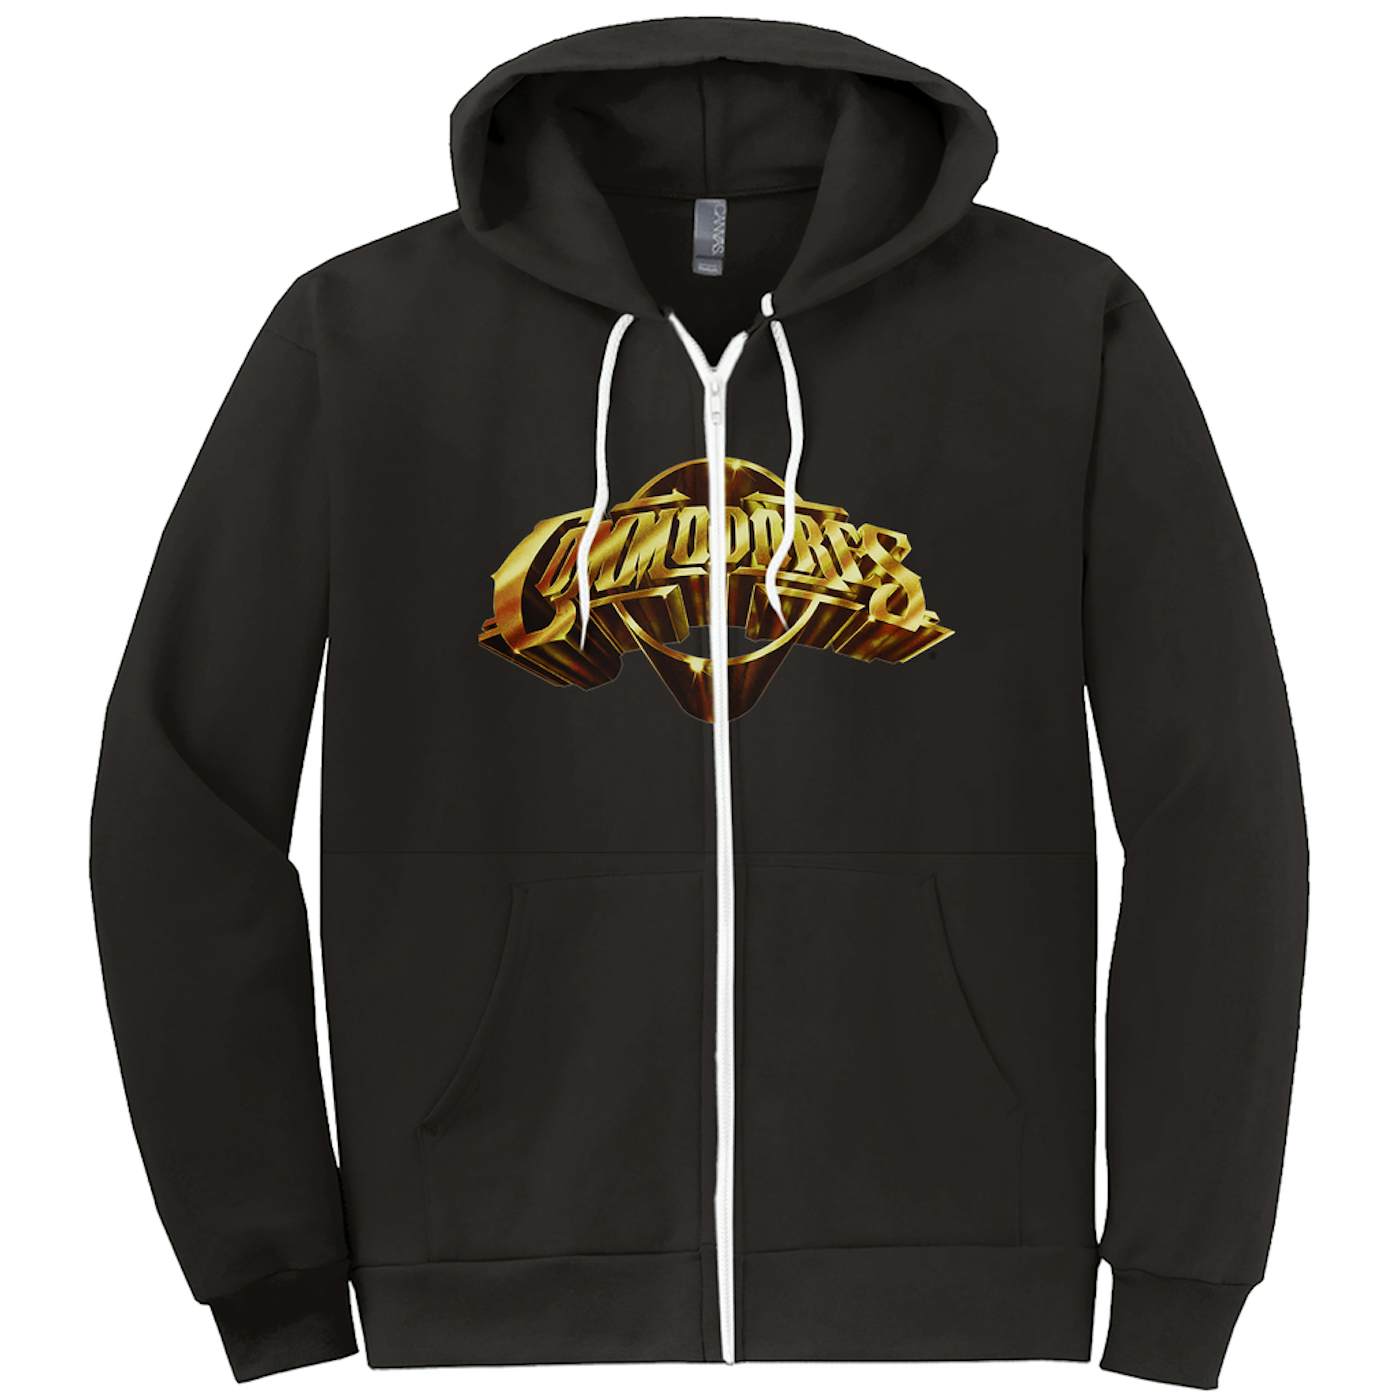 Commodores Classic Logo Zip-Up Hoodie (Black / Gold)